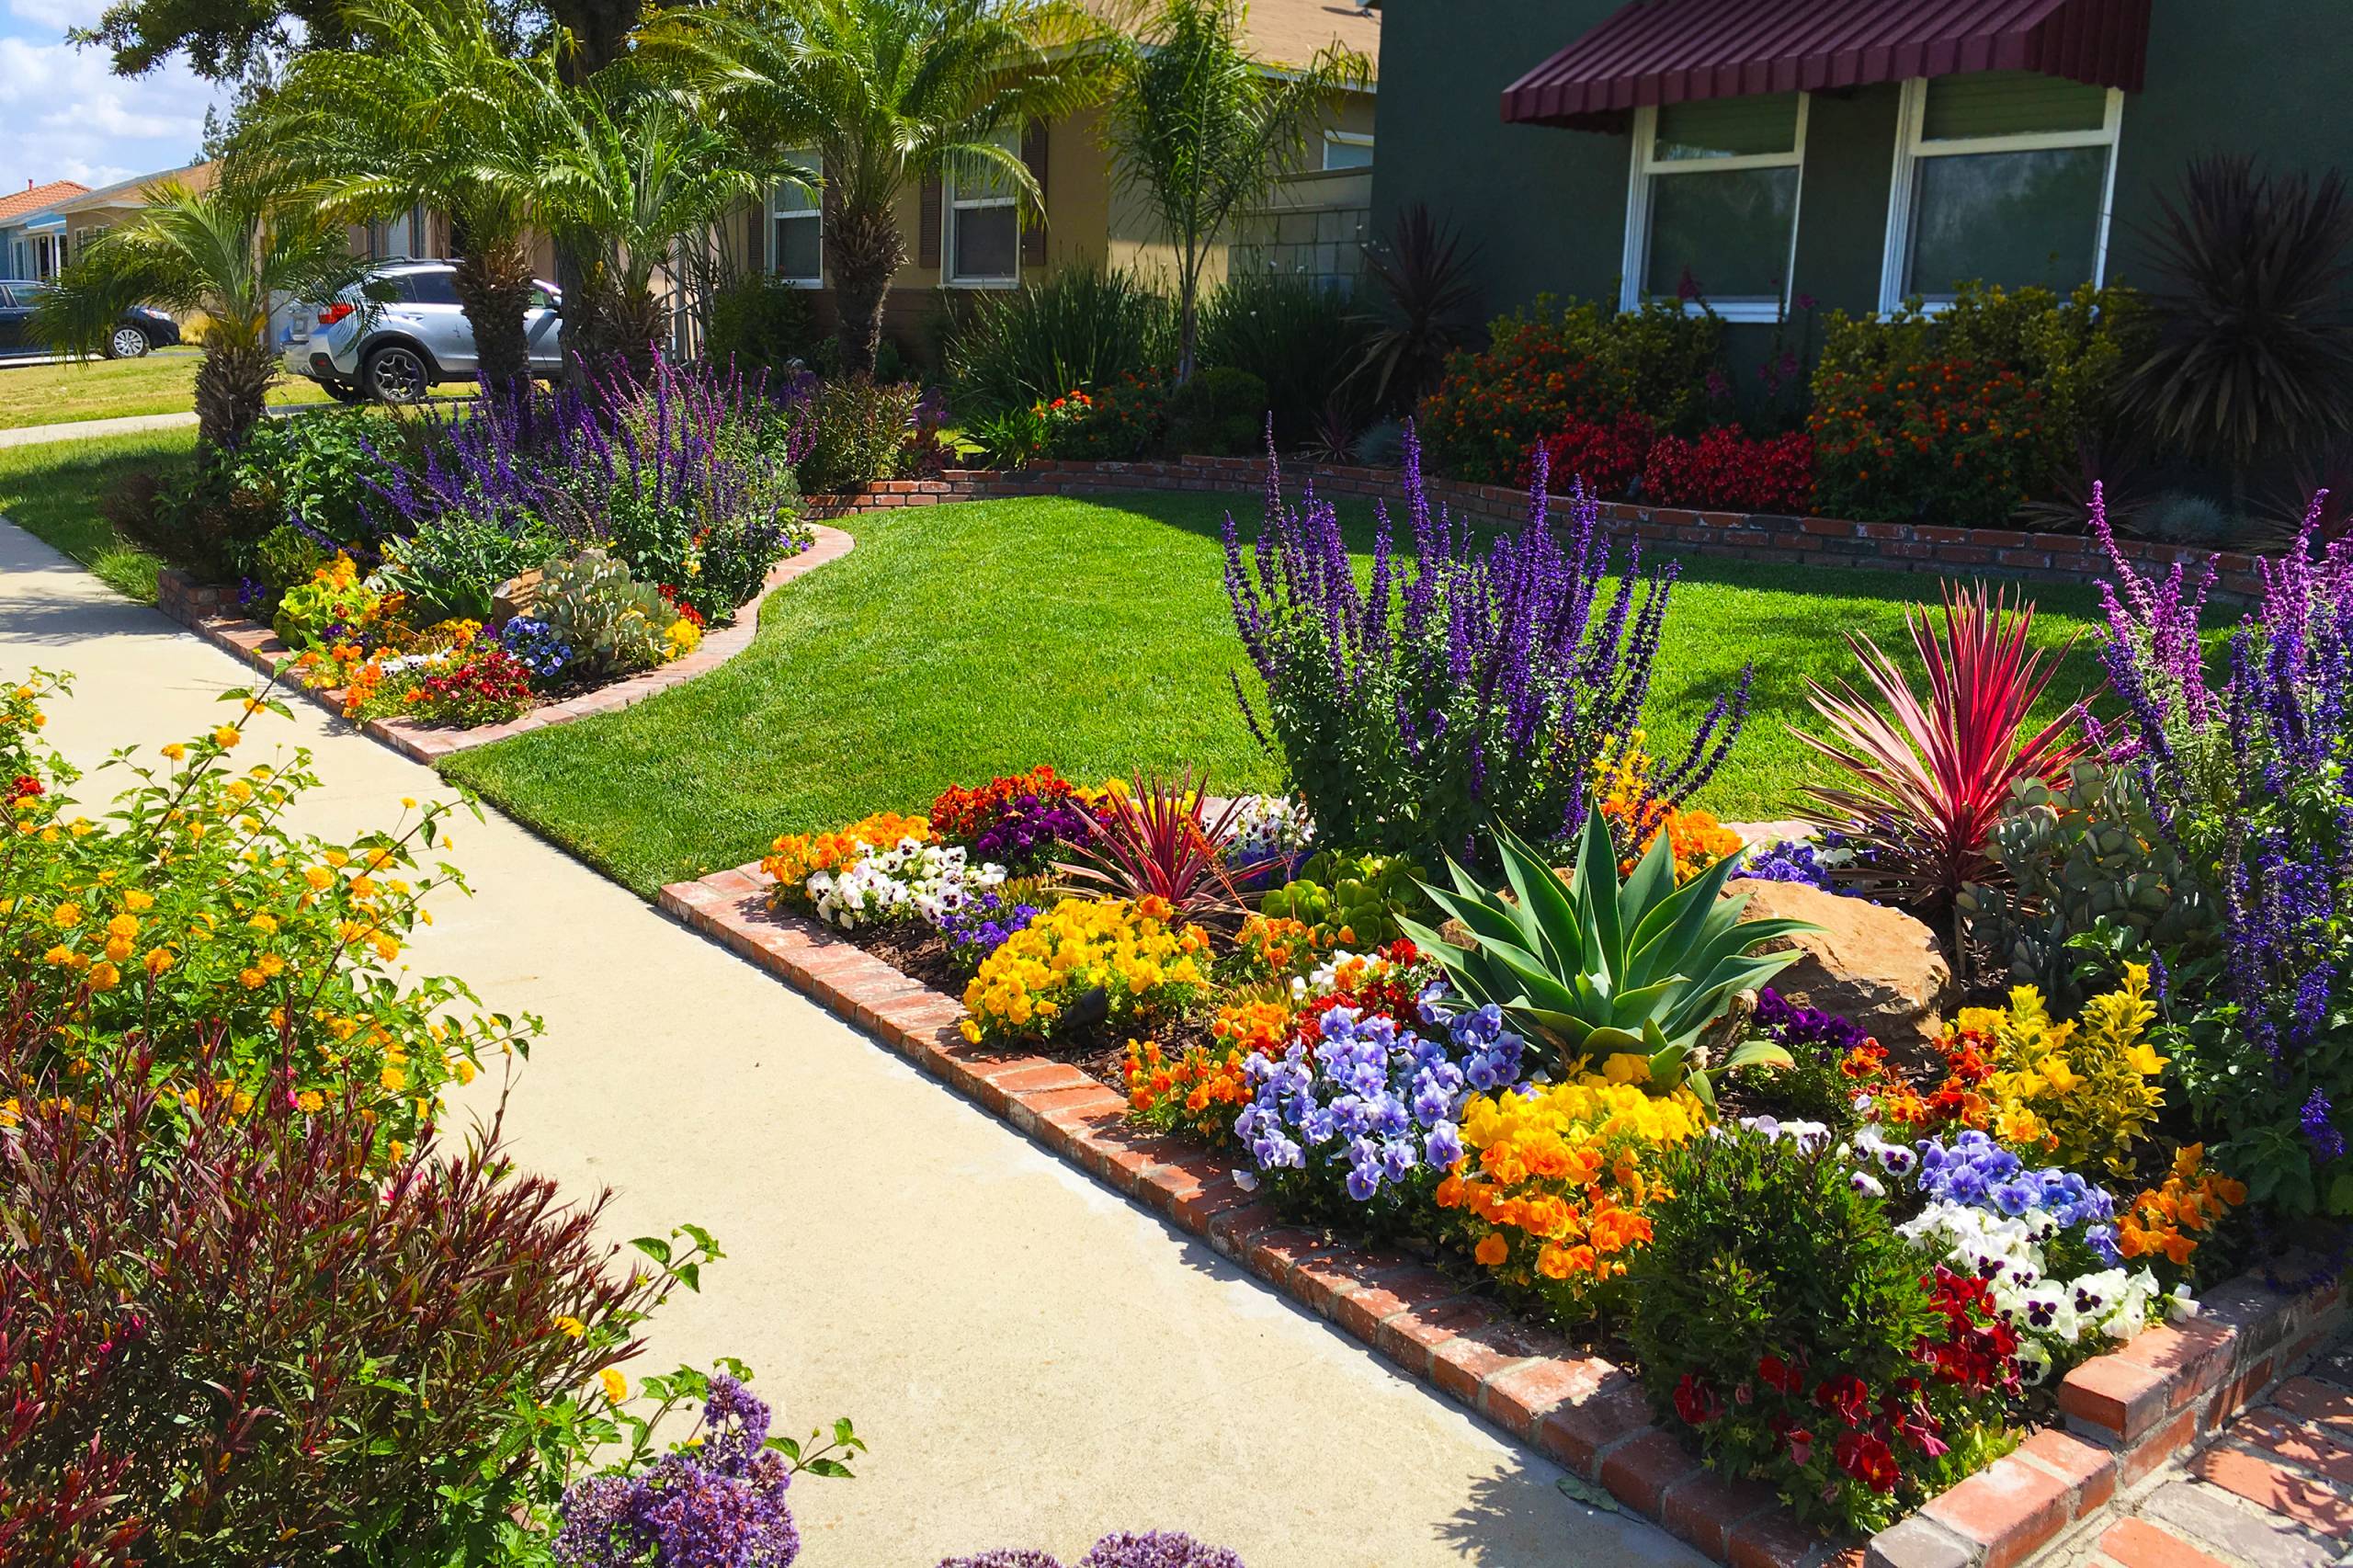 ﻿Landscaping Ideas